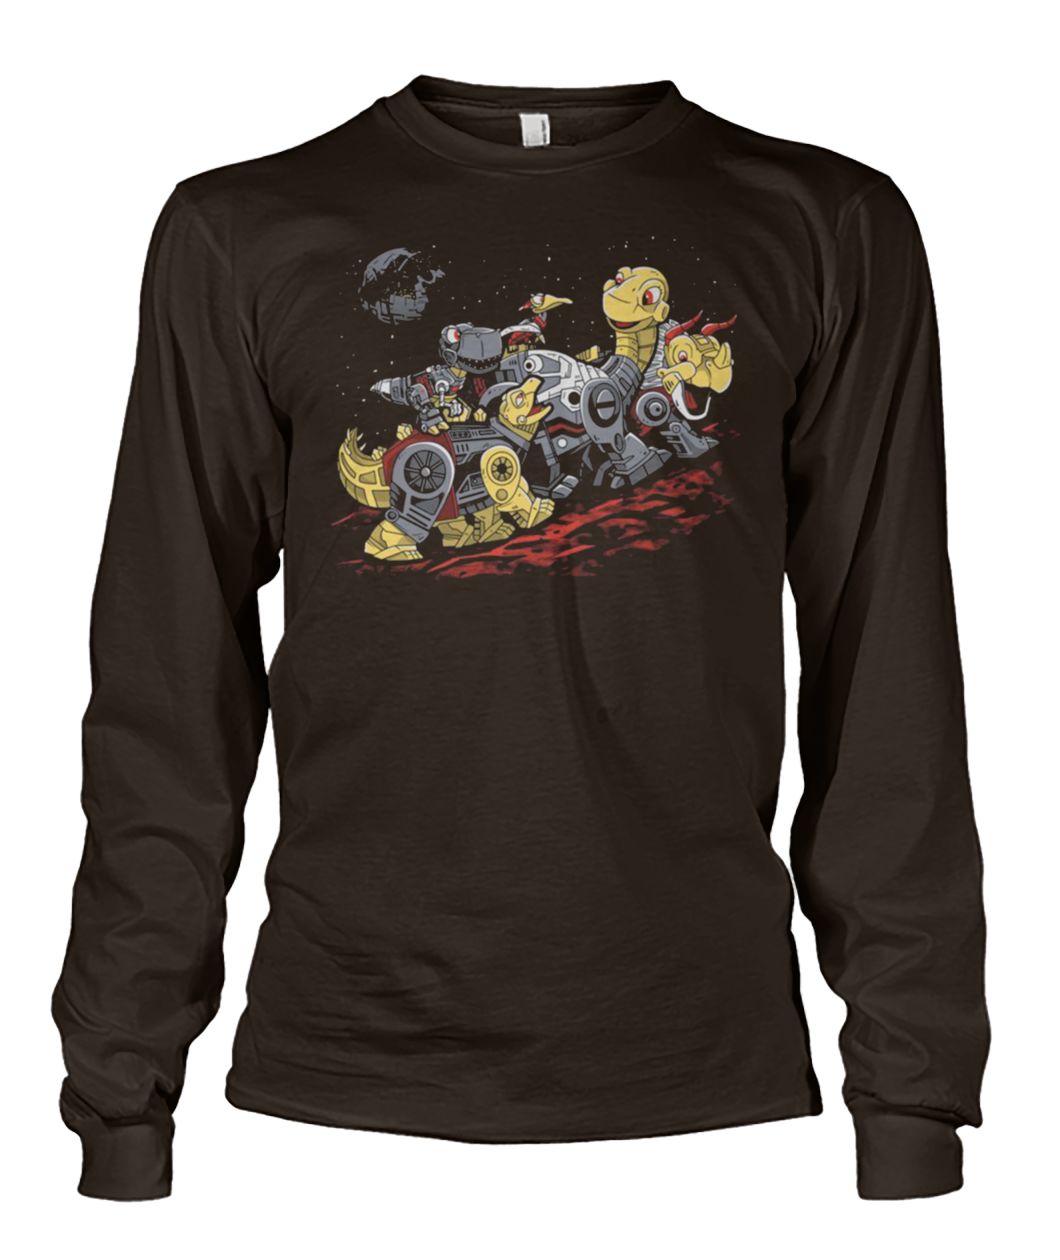 Bots before time transformers and the land before time unisex long sleeve